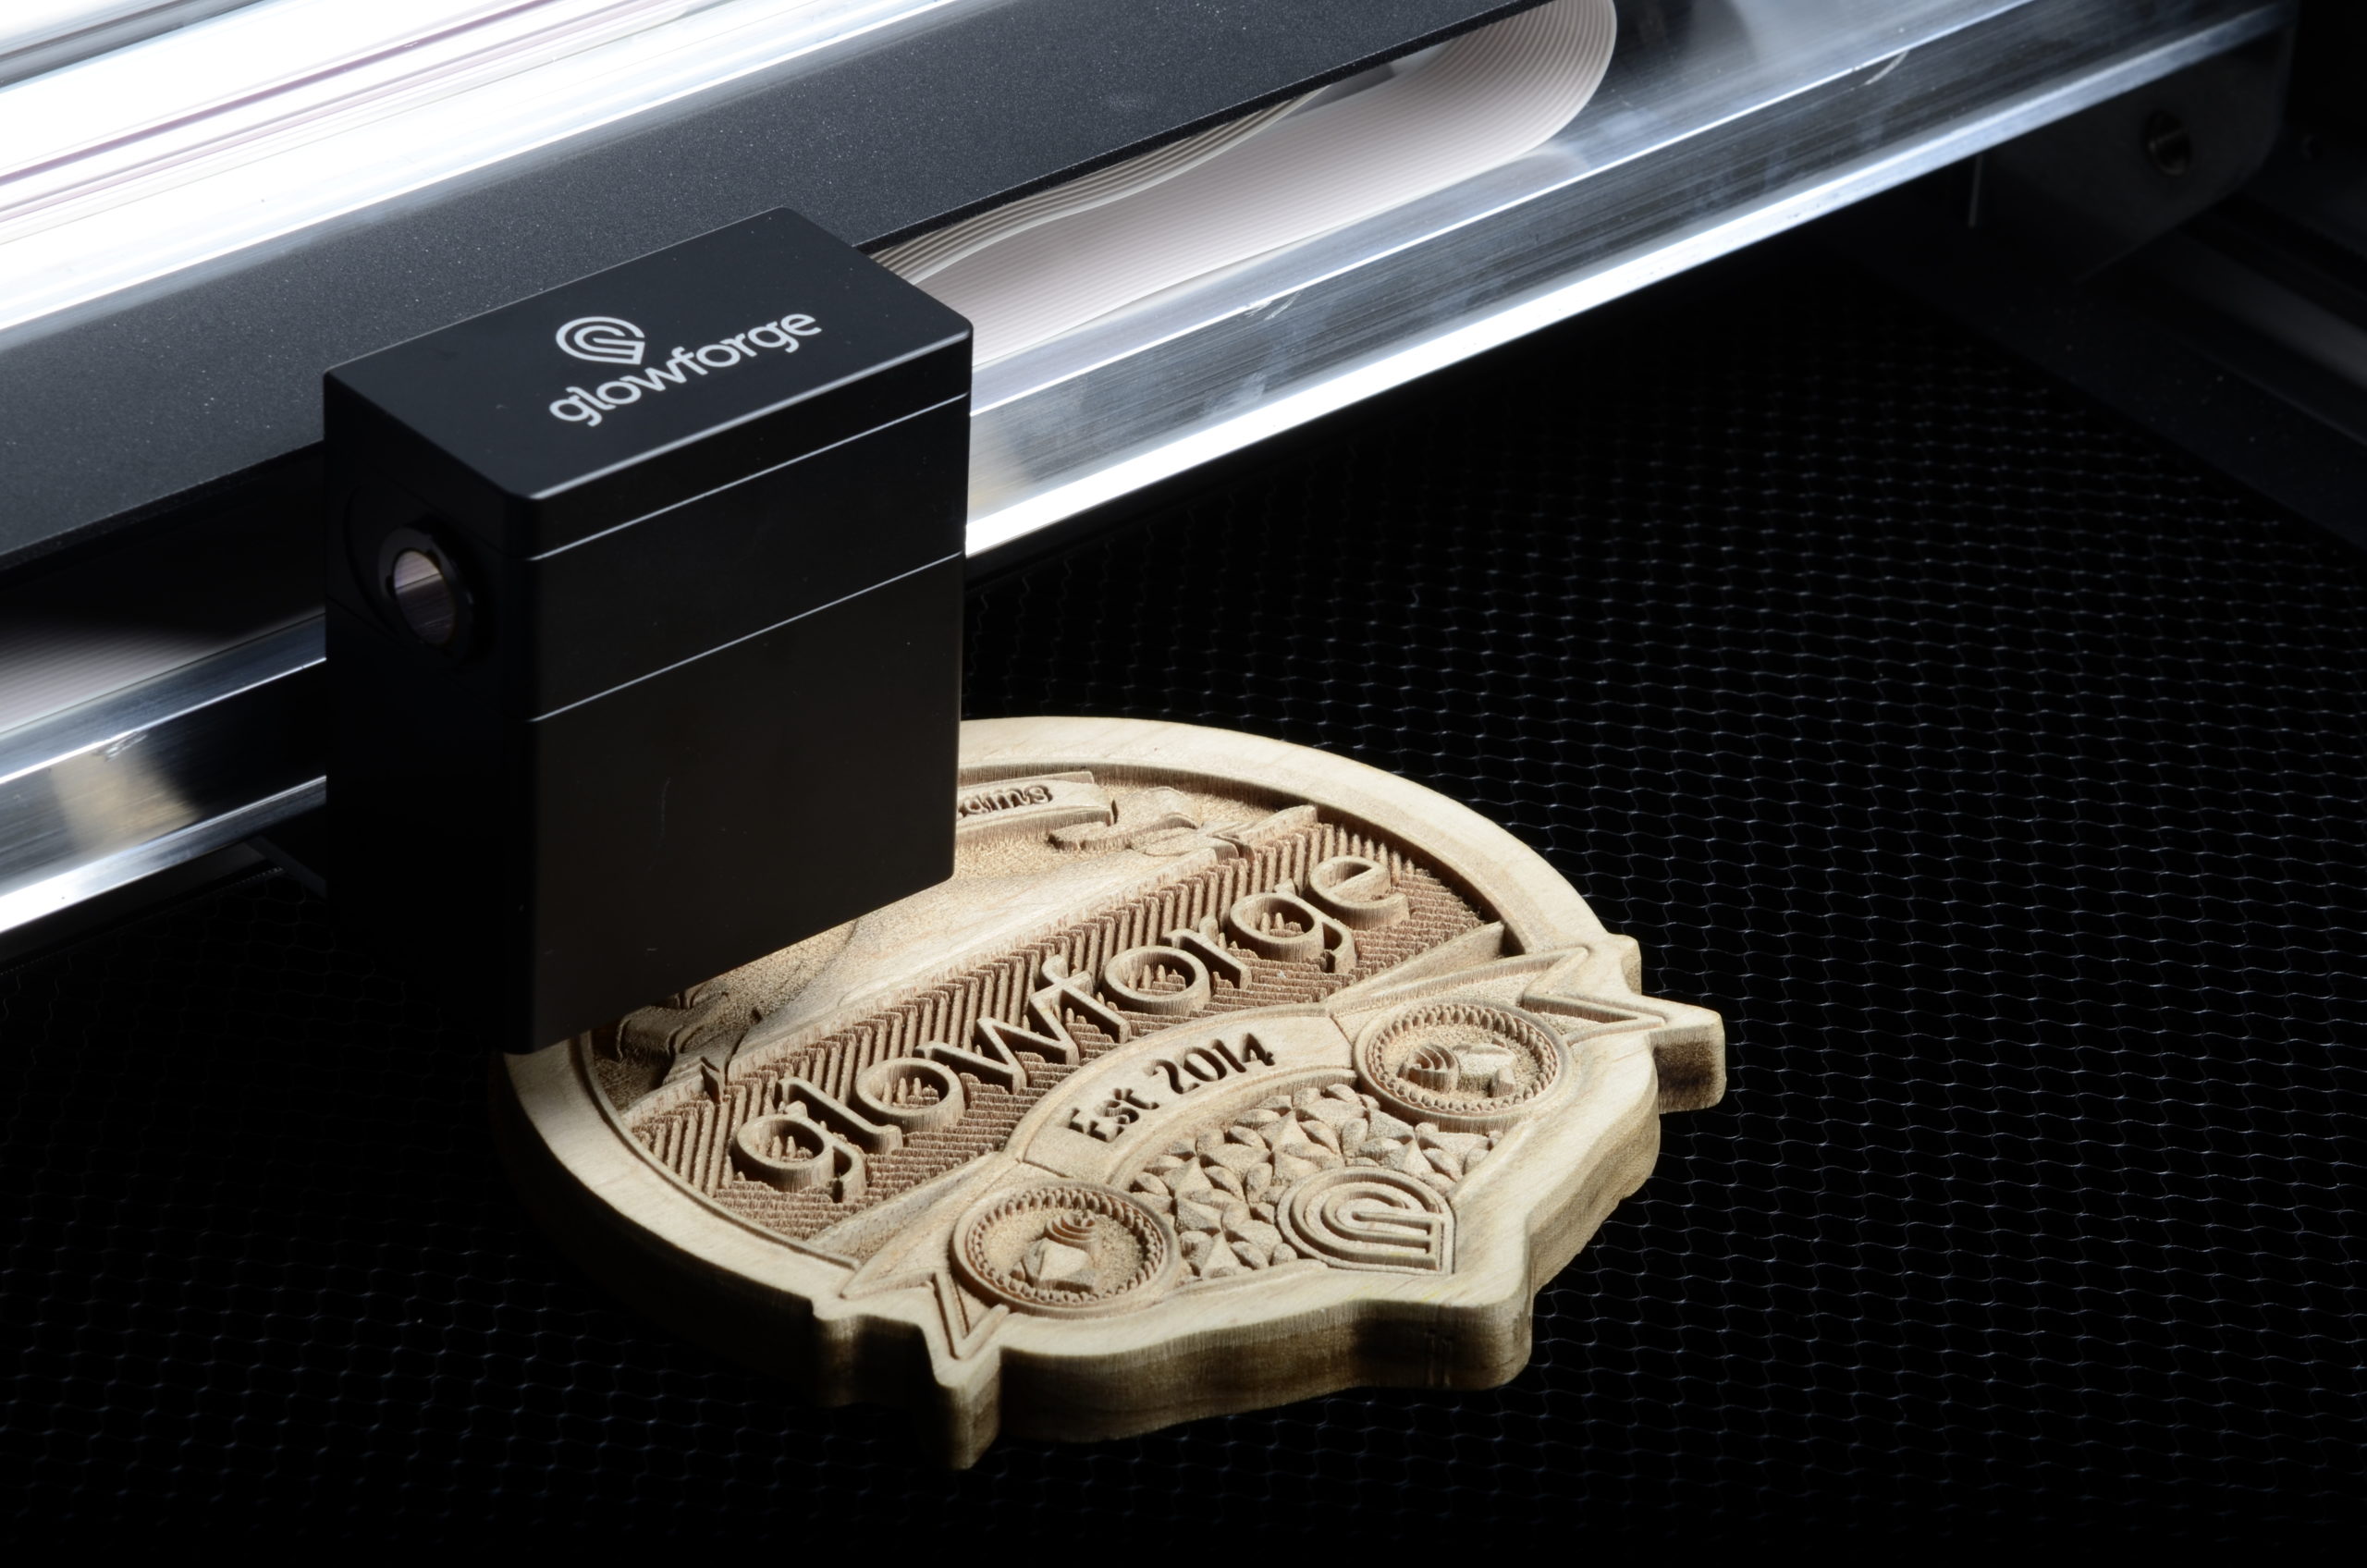 Cutting + Engraving Wood with a Laser - The Glowforge Blog